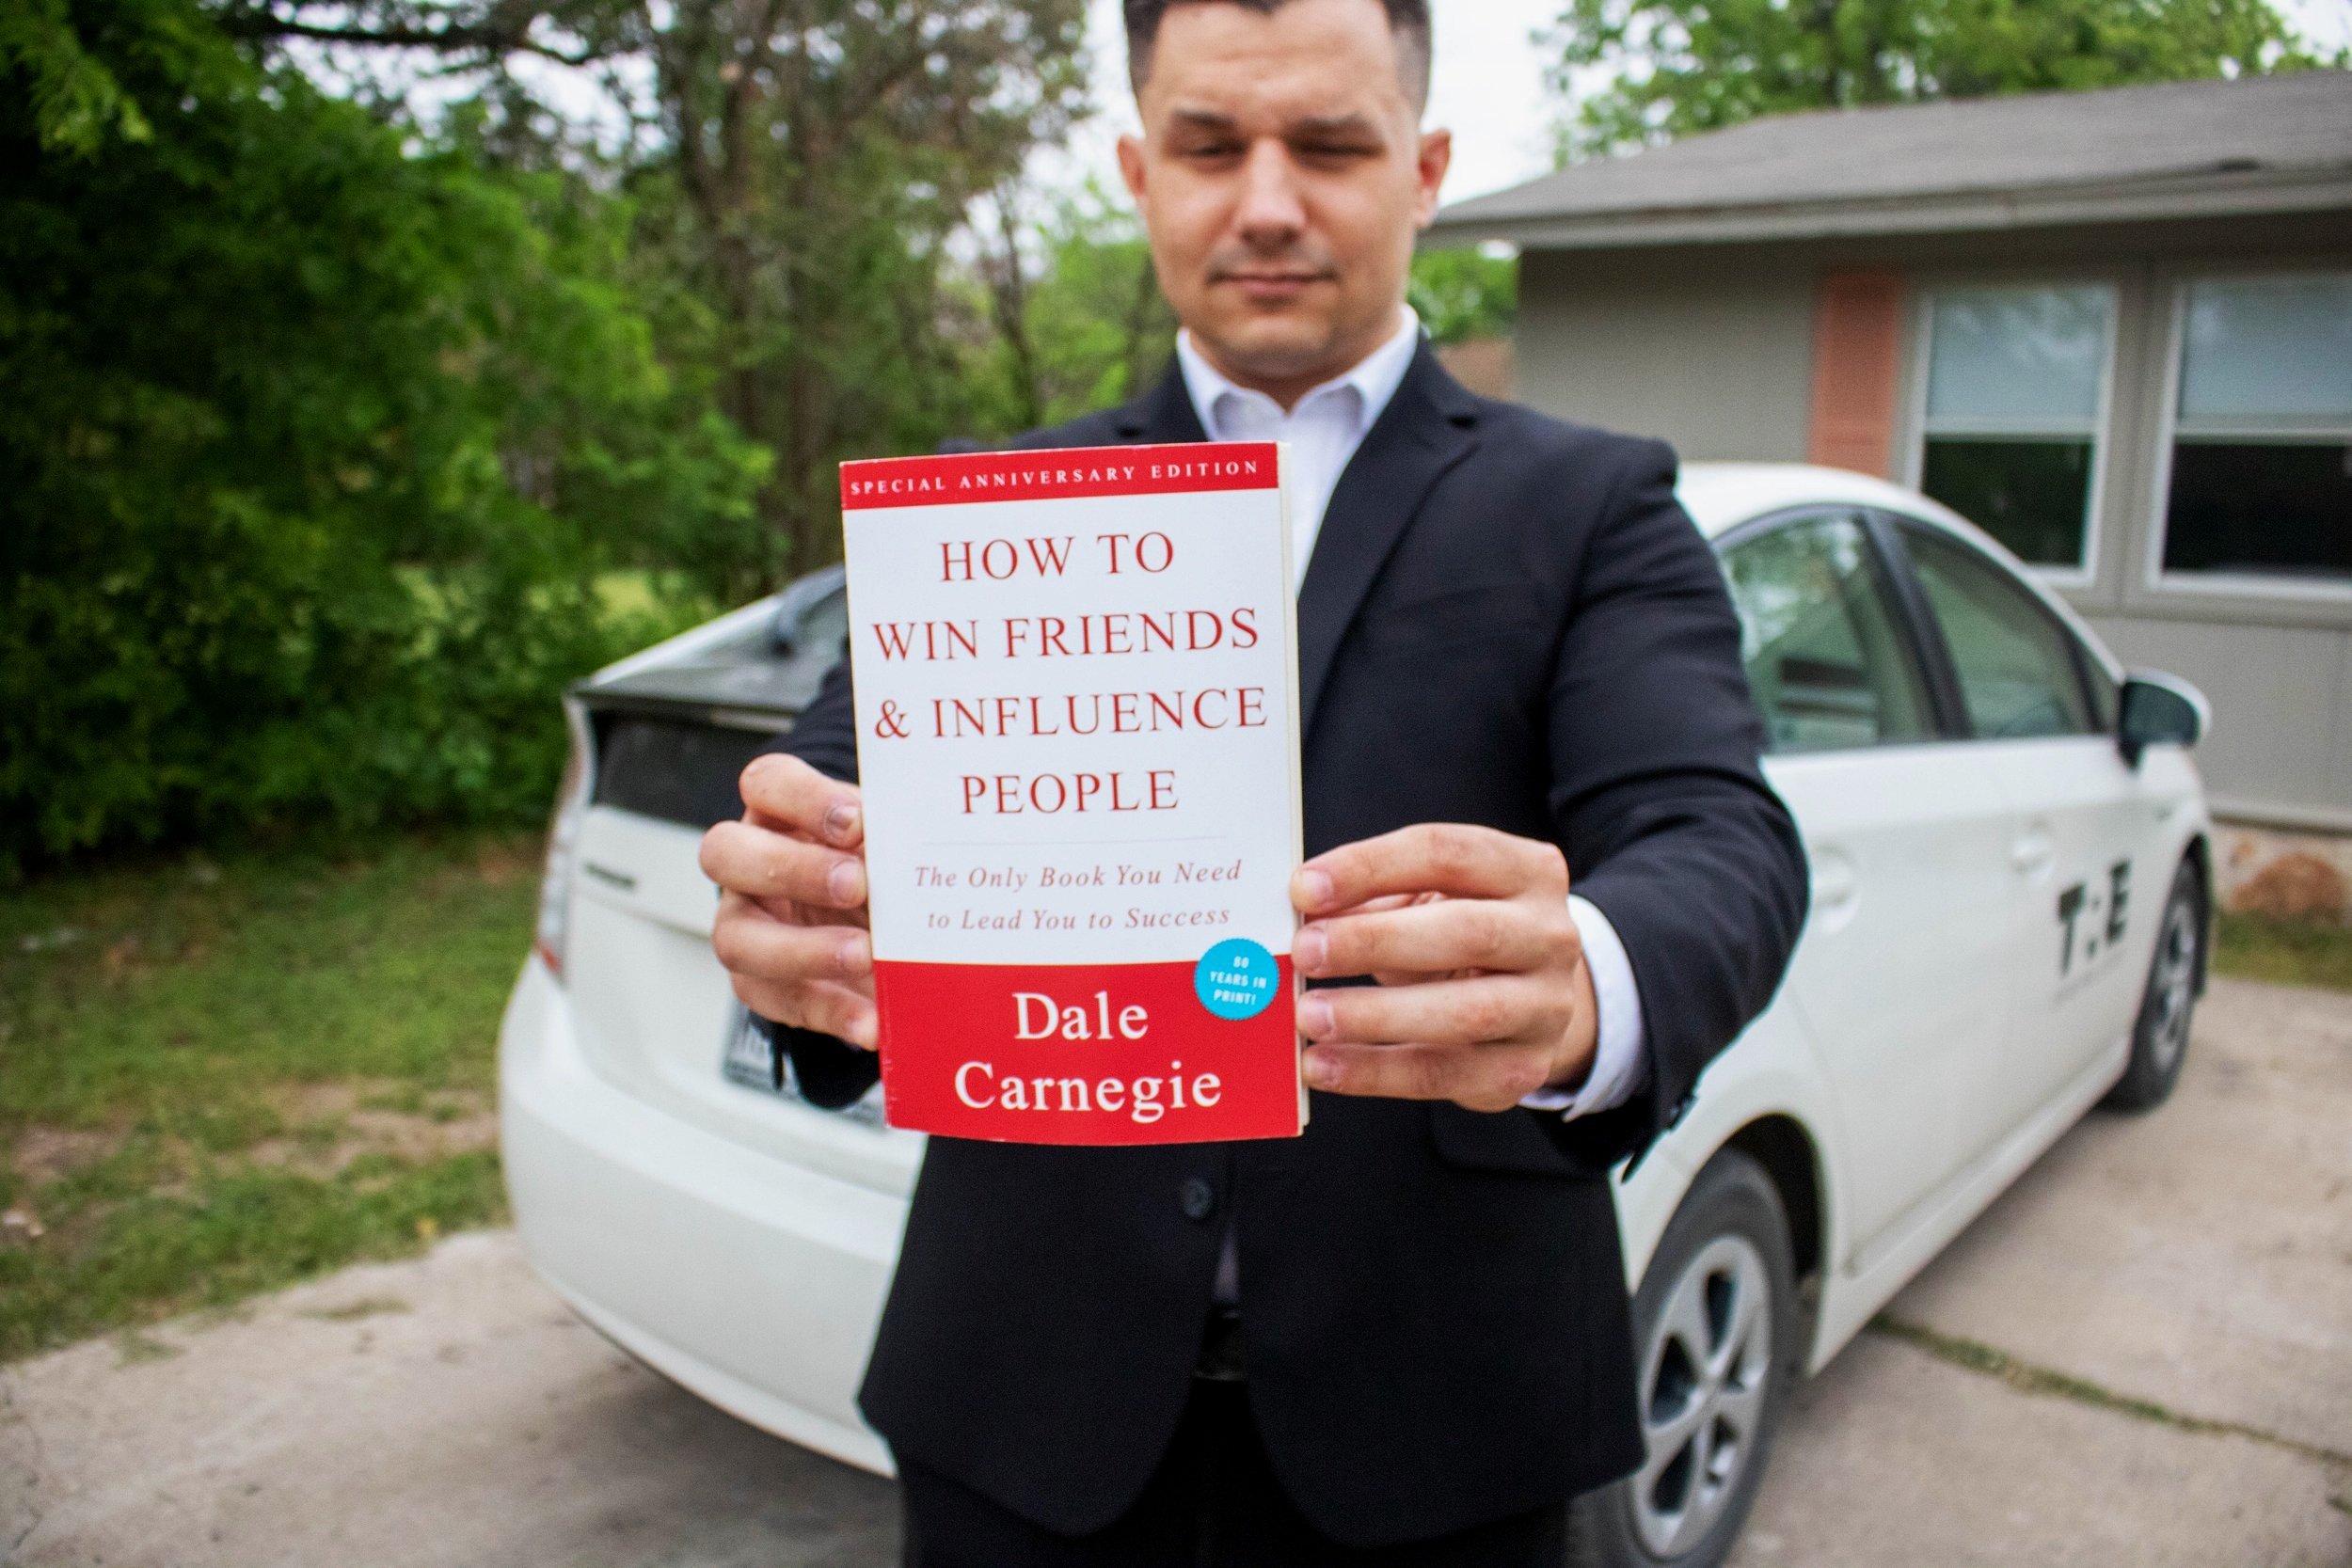 Man in black suit holding the book, how to win friends and influence people